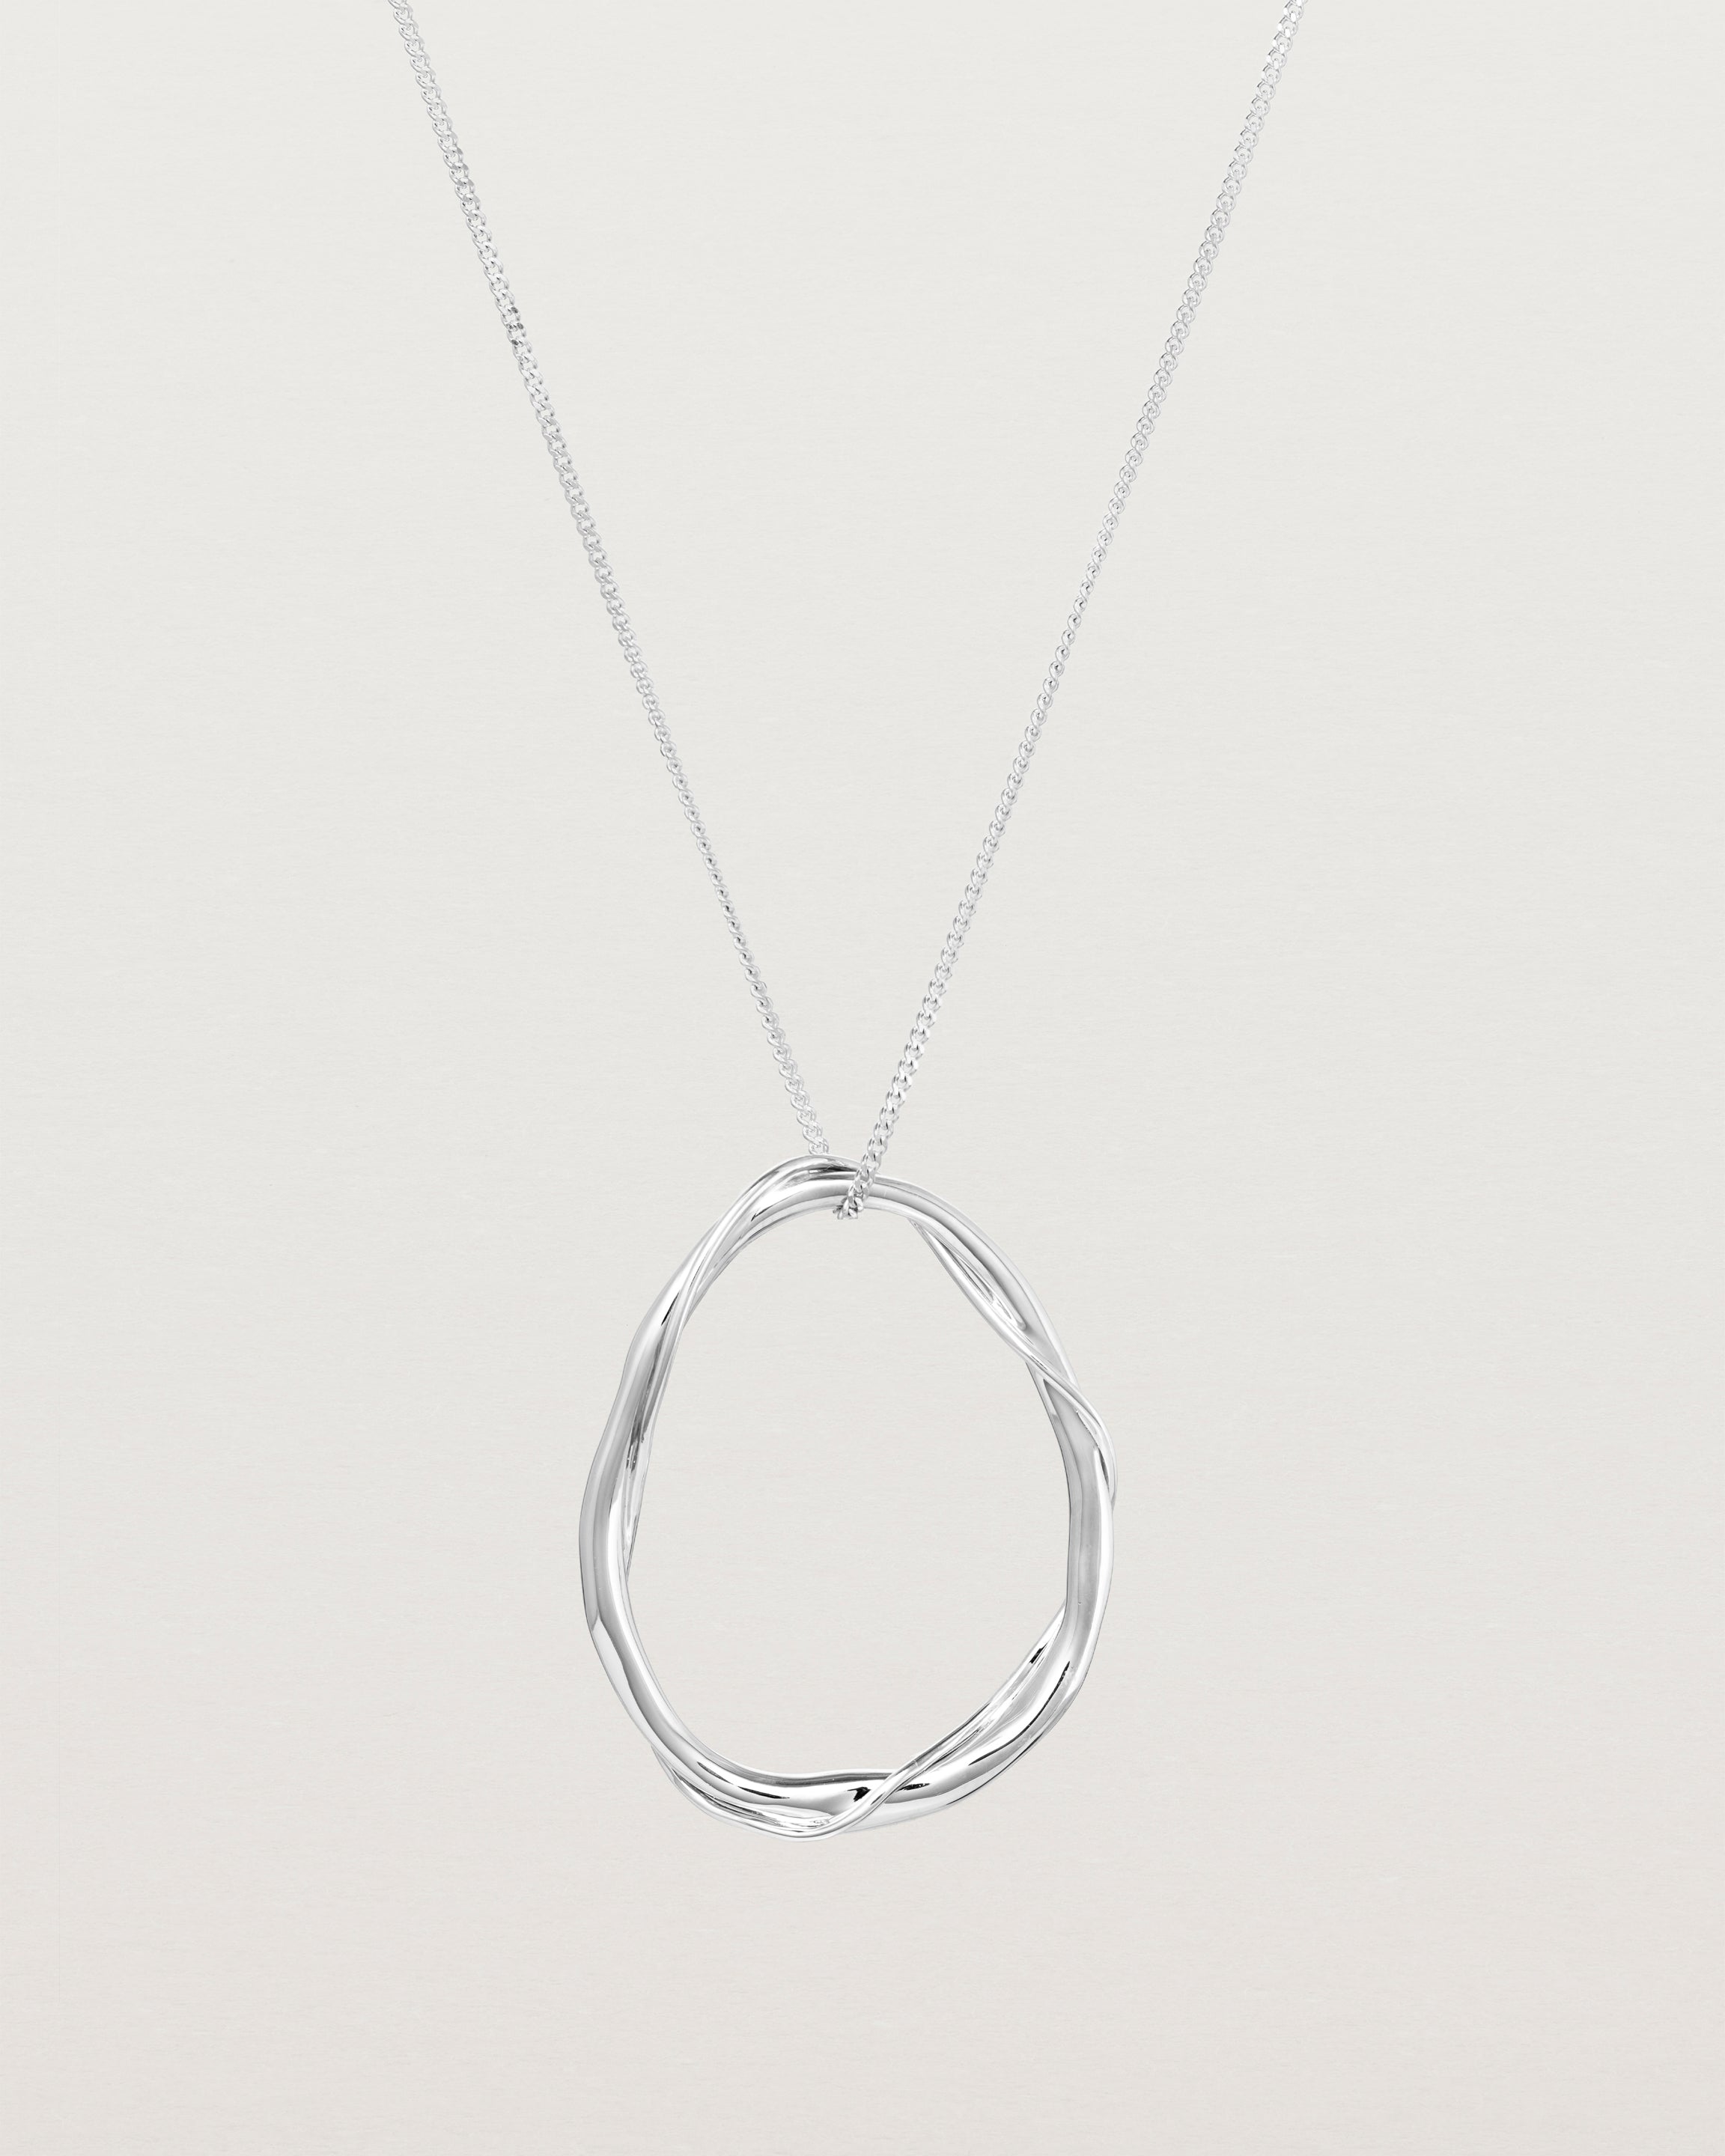 Front view of the Dalí Necklace in sterling silver.